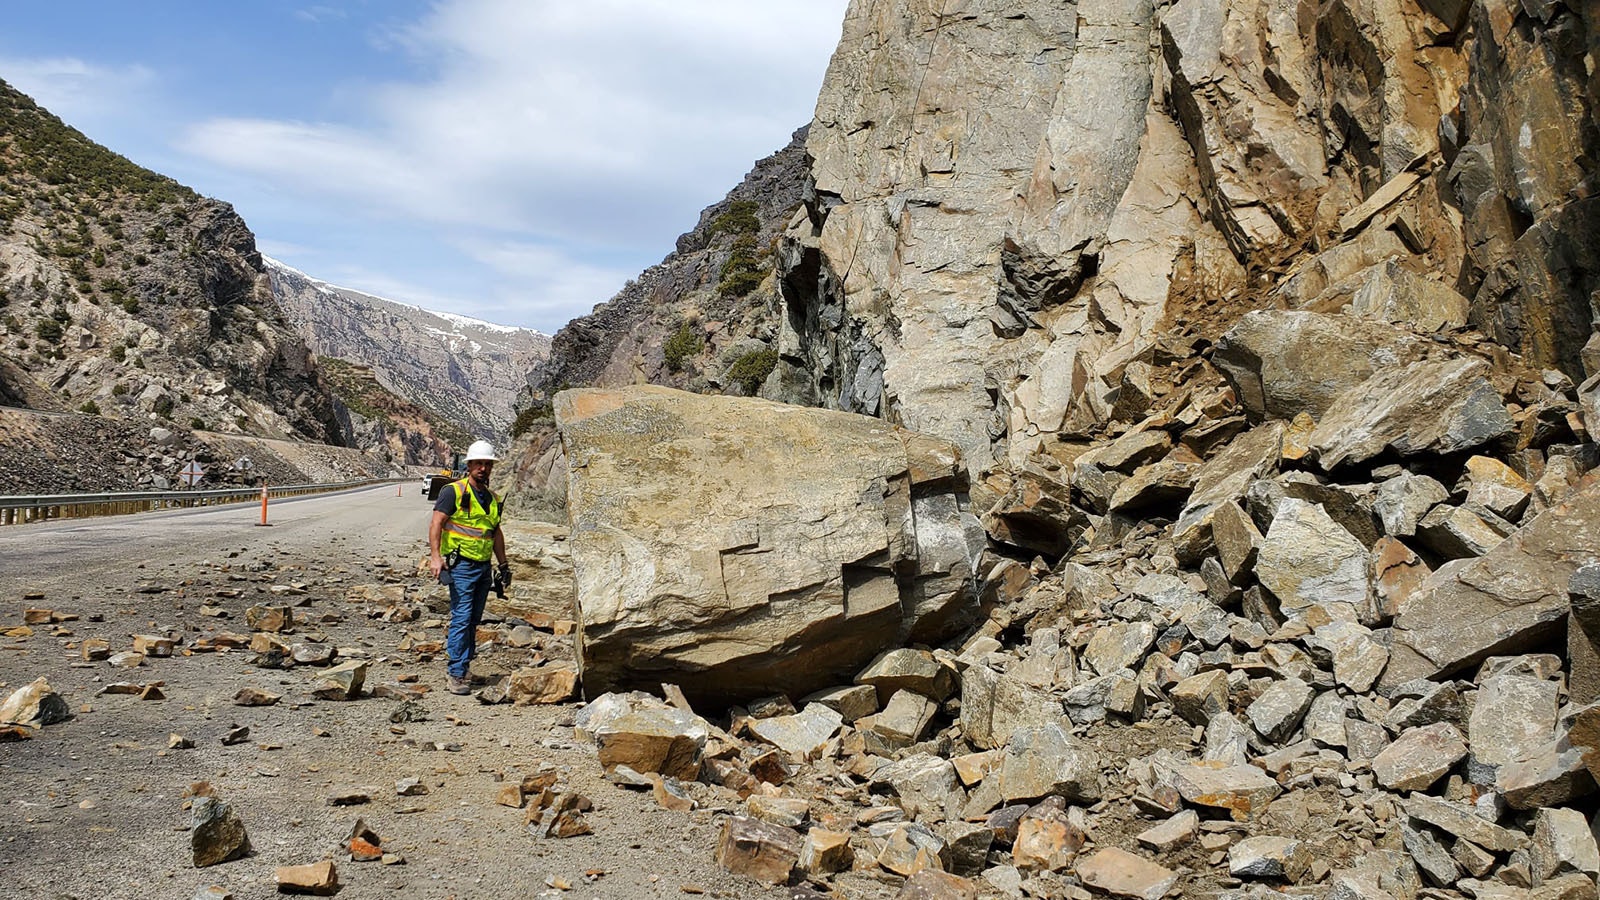 Springtime is also known as "rockfall season" through Wind River Canyon in central Wyoming. So far this year, rockfall season has been pretty quiet.